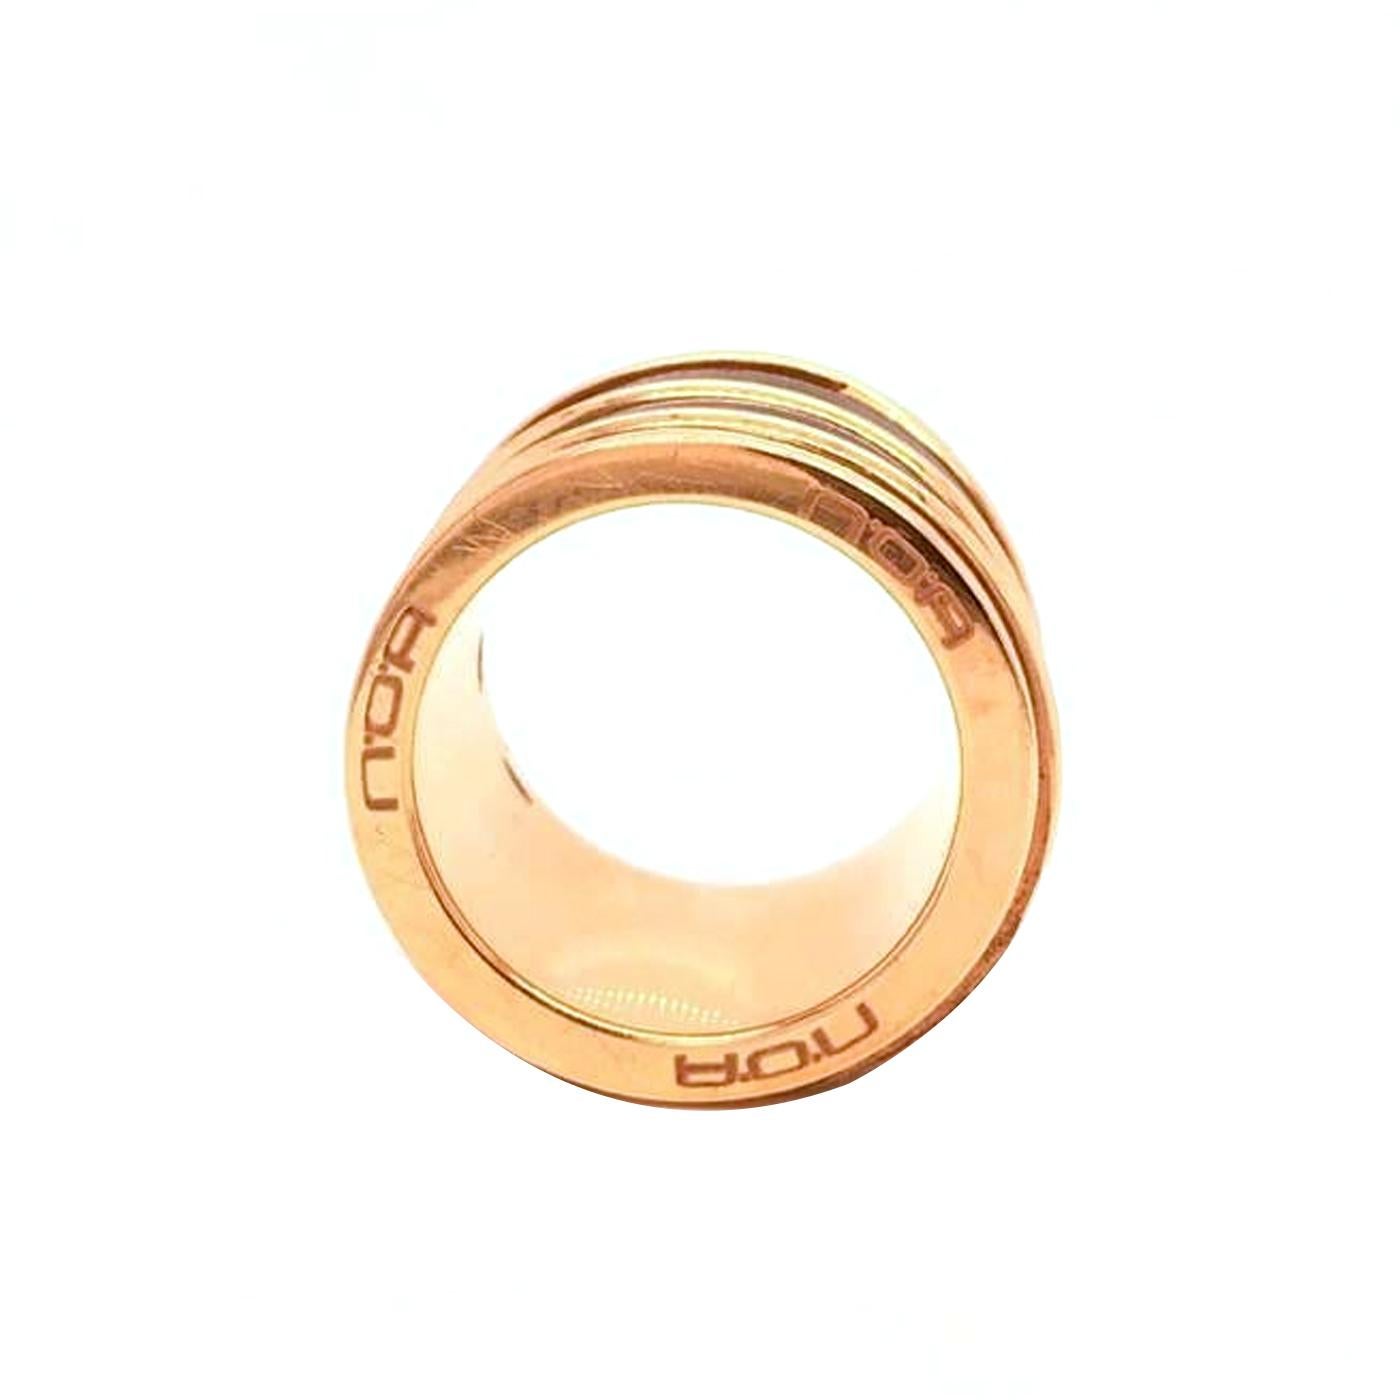 18K of round-cut NOA Designer Ring.
This Gorgeous NOA Designer Ring is made with 100% 18K Gold. They've passed rigorous standards for genuine fine jewelry.
Whether for an engagement, wedding, or promise ring - or 'just because' - our colorful rings